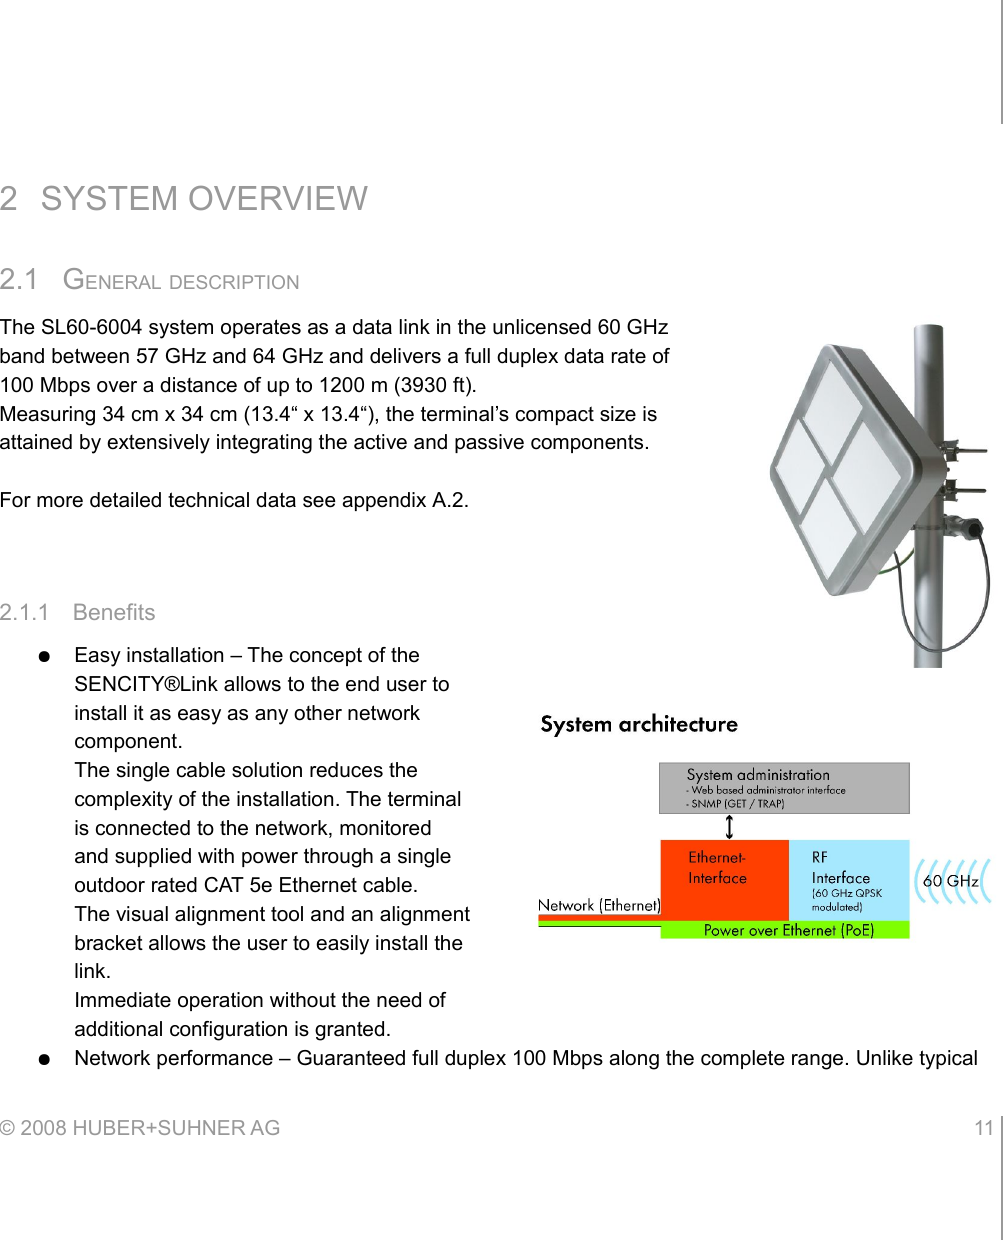 2 SYSTEM OVERVIEW2.1 GENERAL DESCRIPTIONThe SL60-6004 system operates as a data link in the unlicensed 60 GHz band between 57 GHz and 64 GHz and delivers a full duplex data rate of 100 Mbps over a distance of up to 1200 m (3930 ft).Measuring 34 cm x 34 cm (13.4“ x 13.4“), the terminal’s compact size is attained by extensively integrating the active and passive components.For more detailed technical data see appendix A.2.2.1.1 Benefits●Easy installation – The concept of the SENCITY®Link allows to the end user to install it as easy as any other network component.The single cable solution reduces the complexity of the installation. The terminal is connected to the network, monitored and supplied with power through a single outdoor rated CAT 5e Ethernet cable.The visual alignment tool and an alignment bracket allows the user to easily install the link.Immediate operation without the need of additional configuration is granted.●Network performance – Guaranteed full duplex 100 Mbps along the complete range. Unlike typical © 2008 HUBER+SUHNER AG 11 